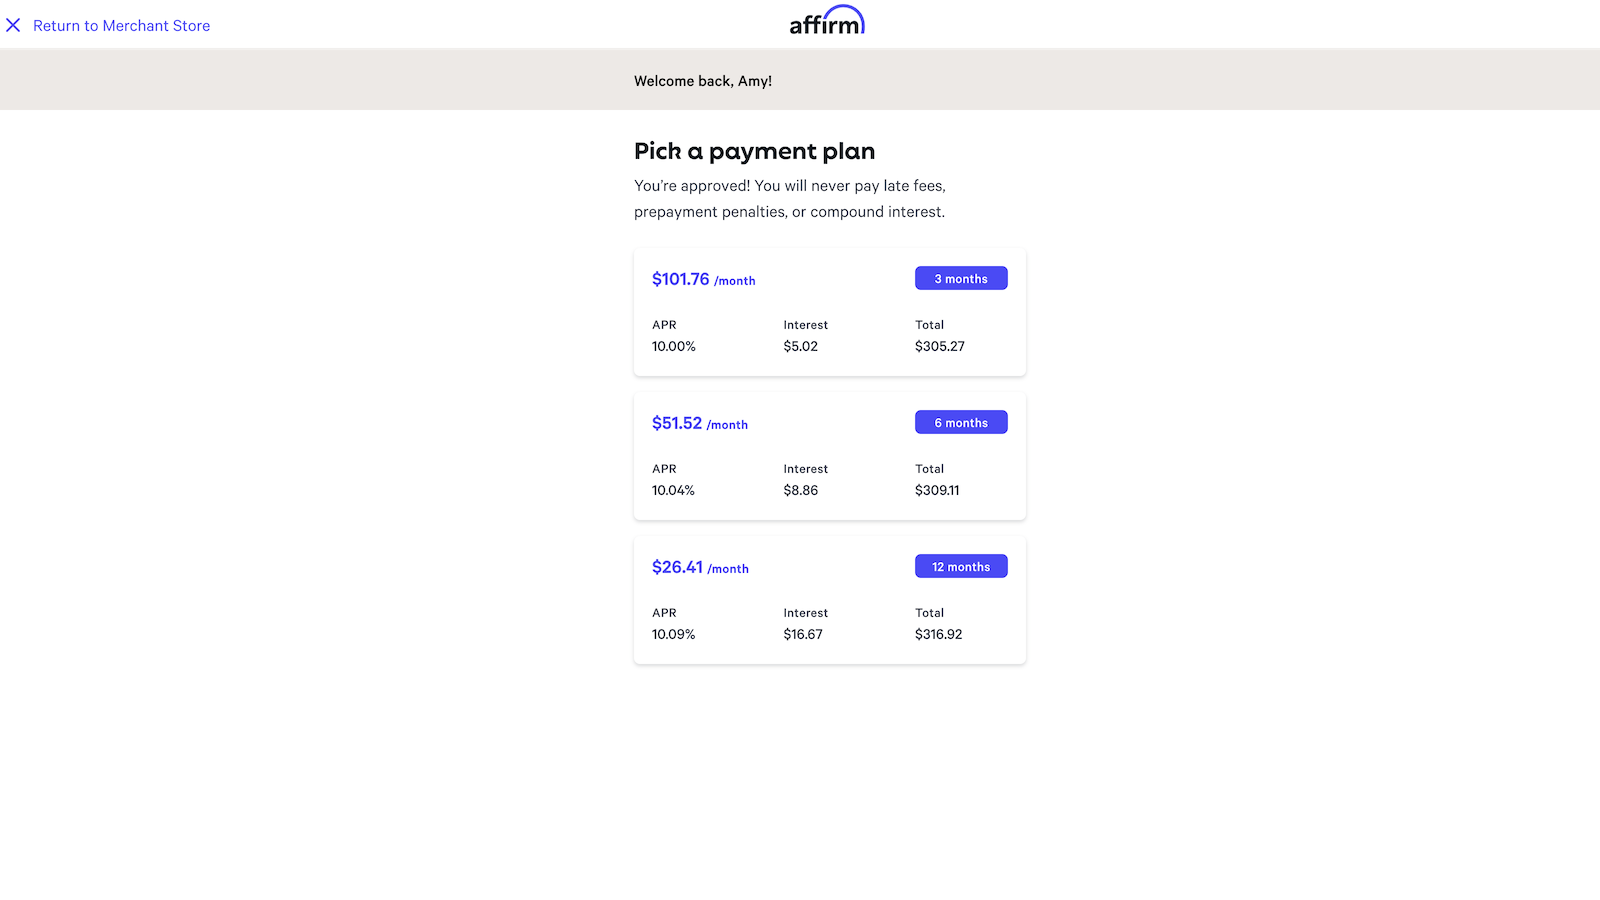 Affirm payment options